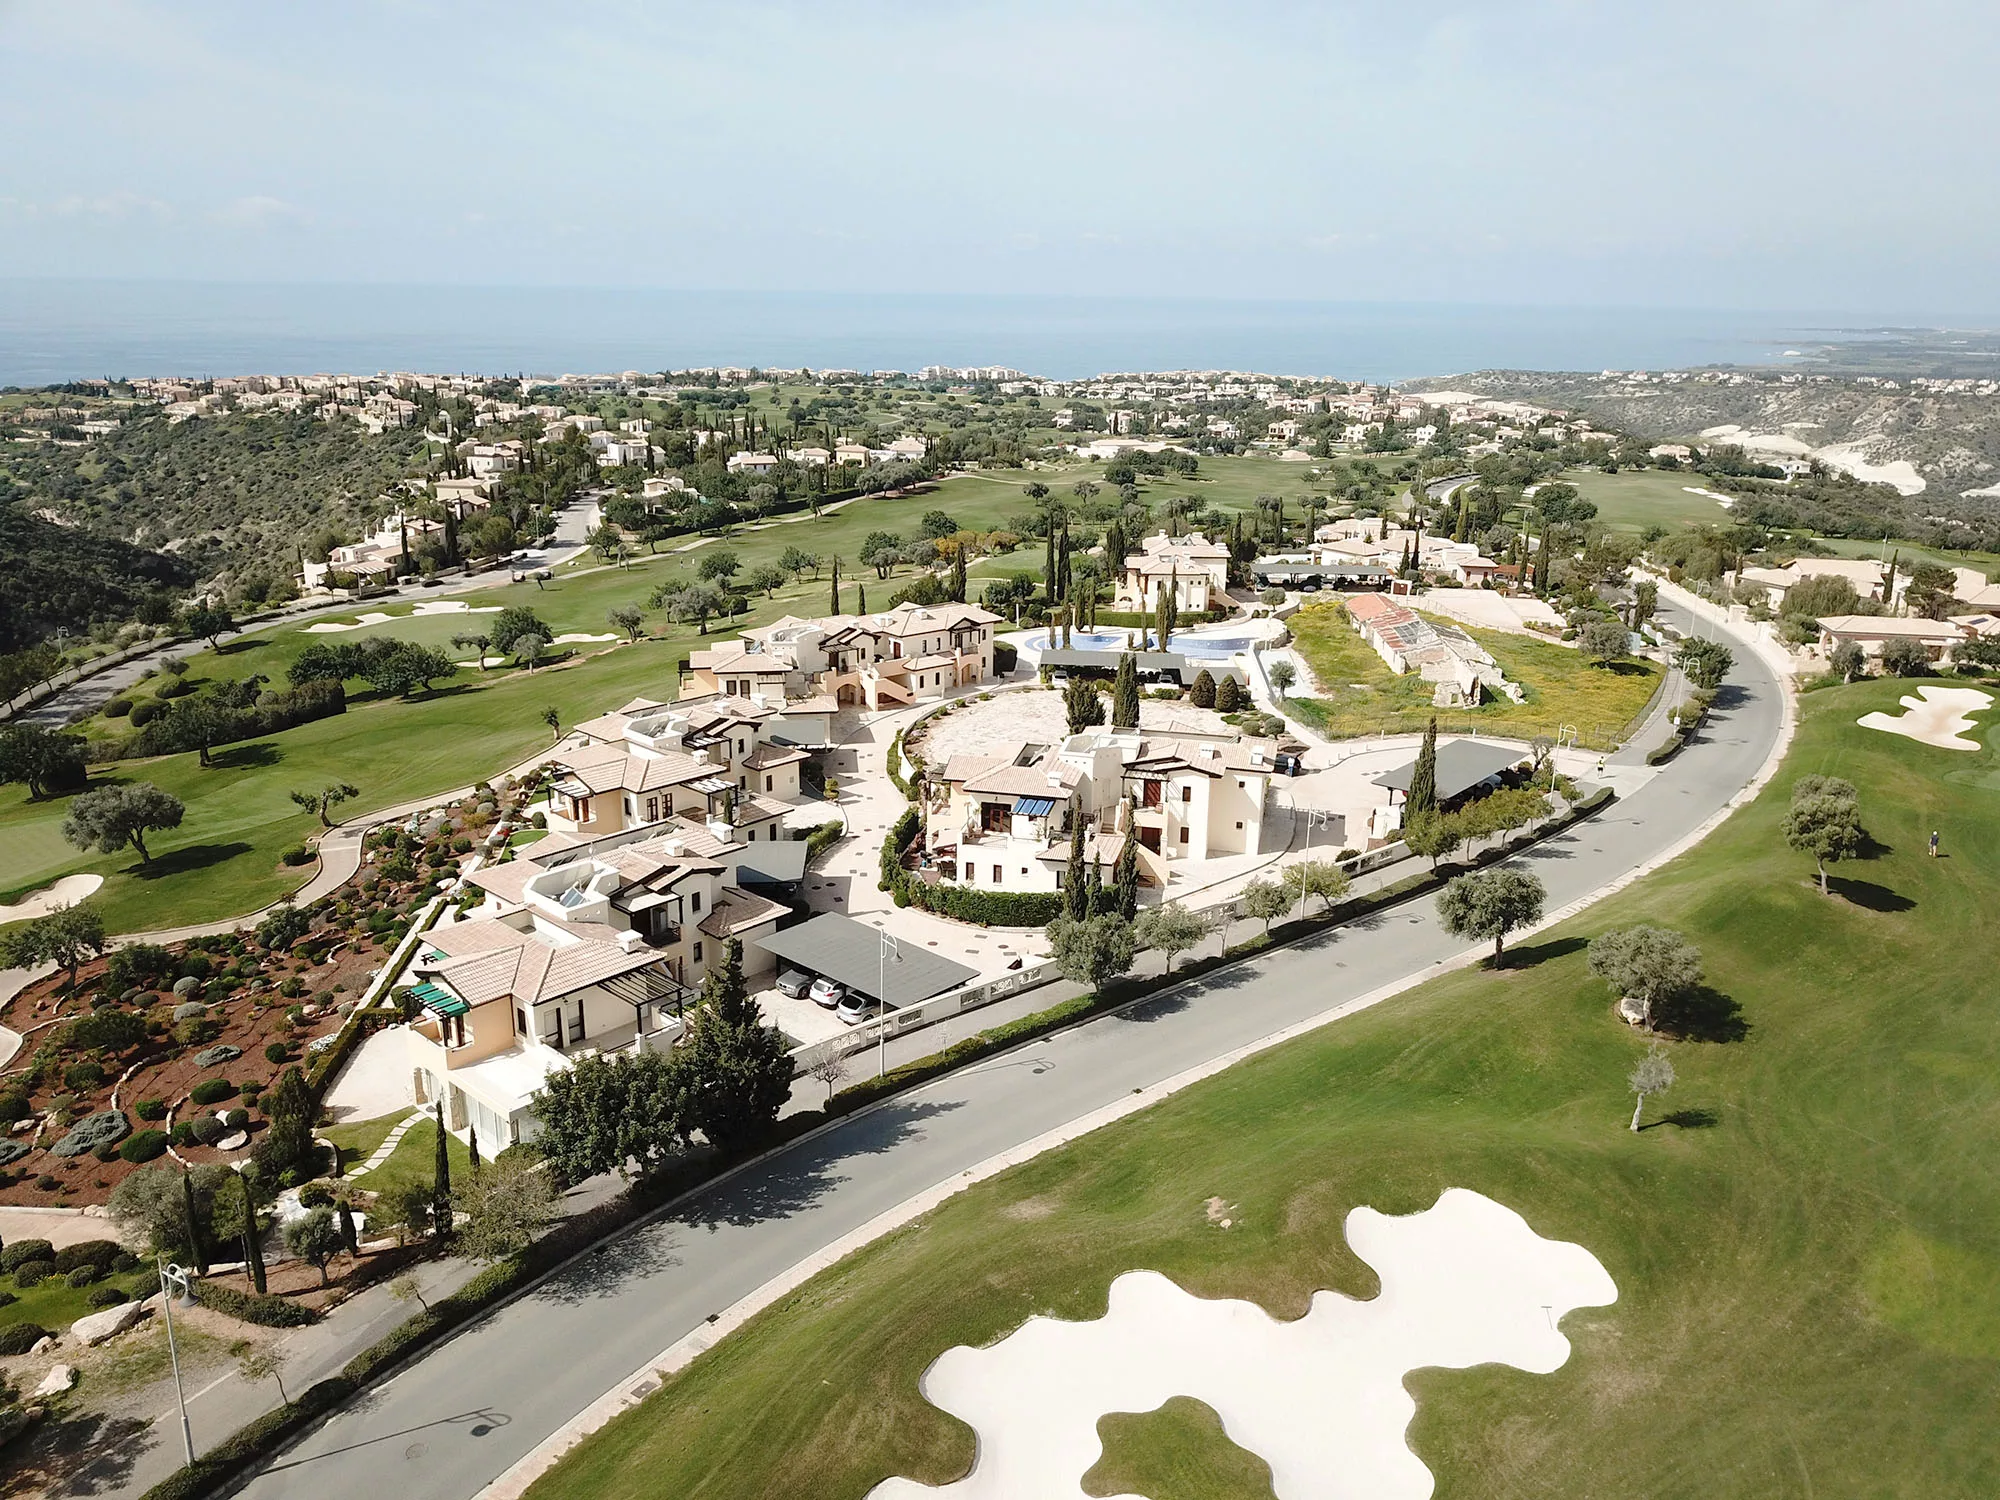 Aerial view of Orpheus Village and golf course holes on Aphrodite Hills PGA National course, looking out to coast and Mediterranean. Properties around resort visable.